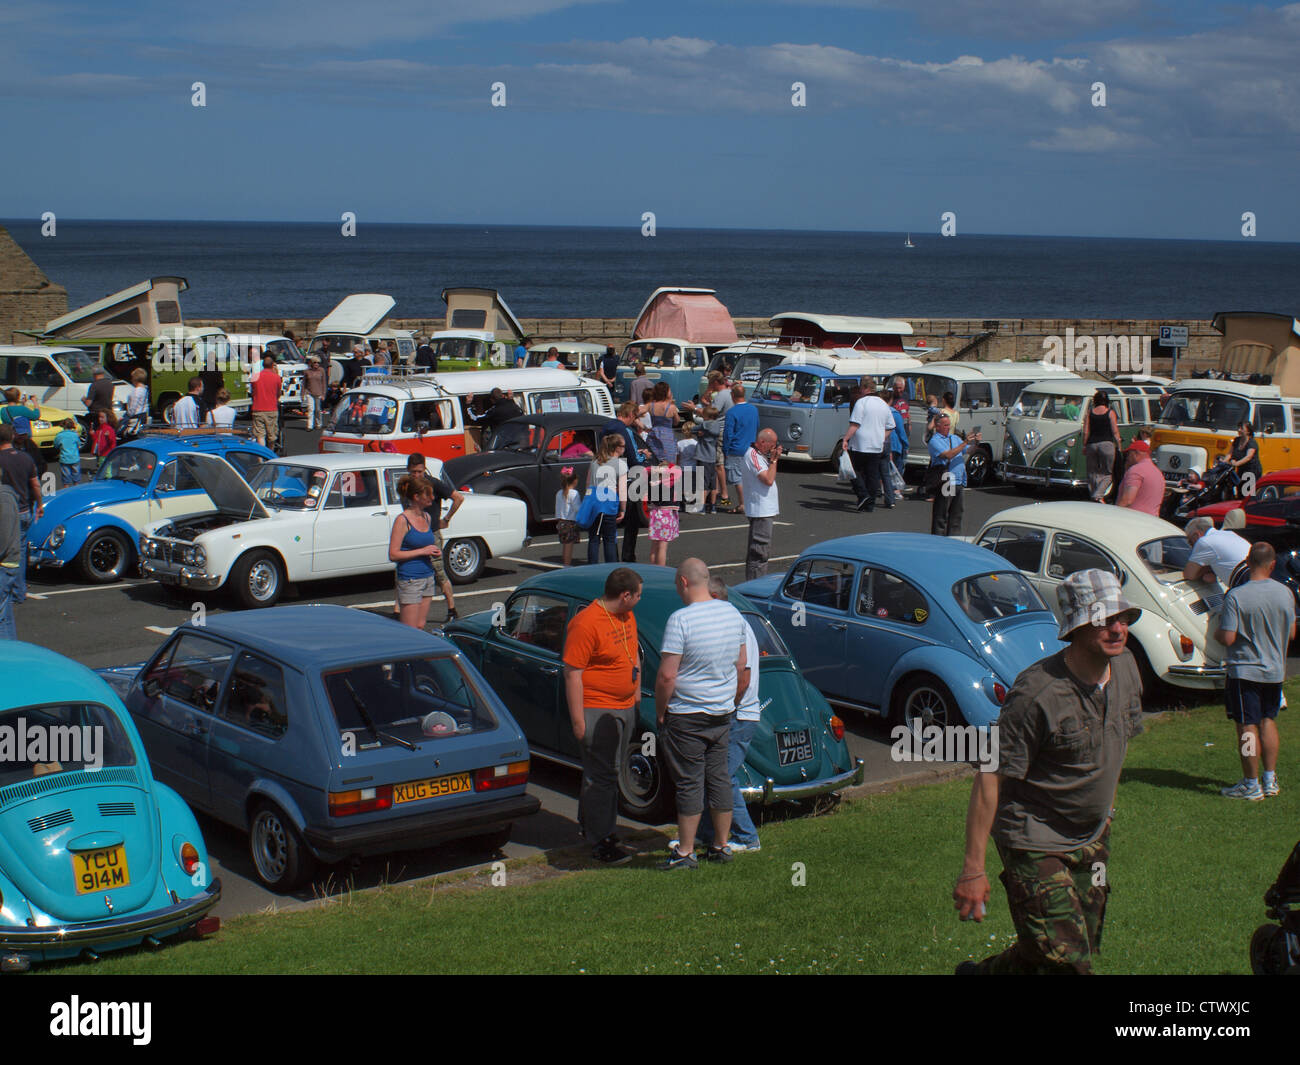 Crowds of people gathering at a vintage Volkswagen classic Car and van festival in Northern England. Stock Photo